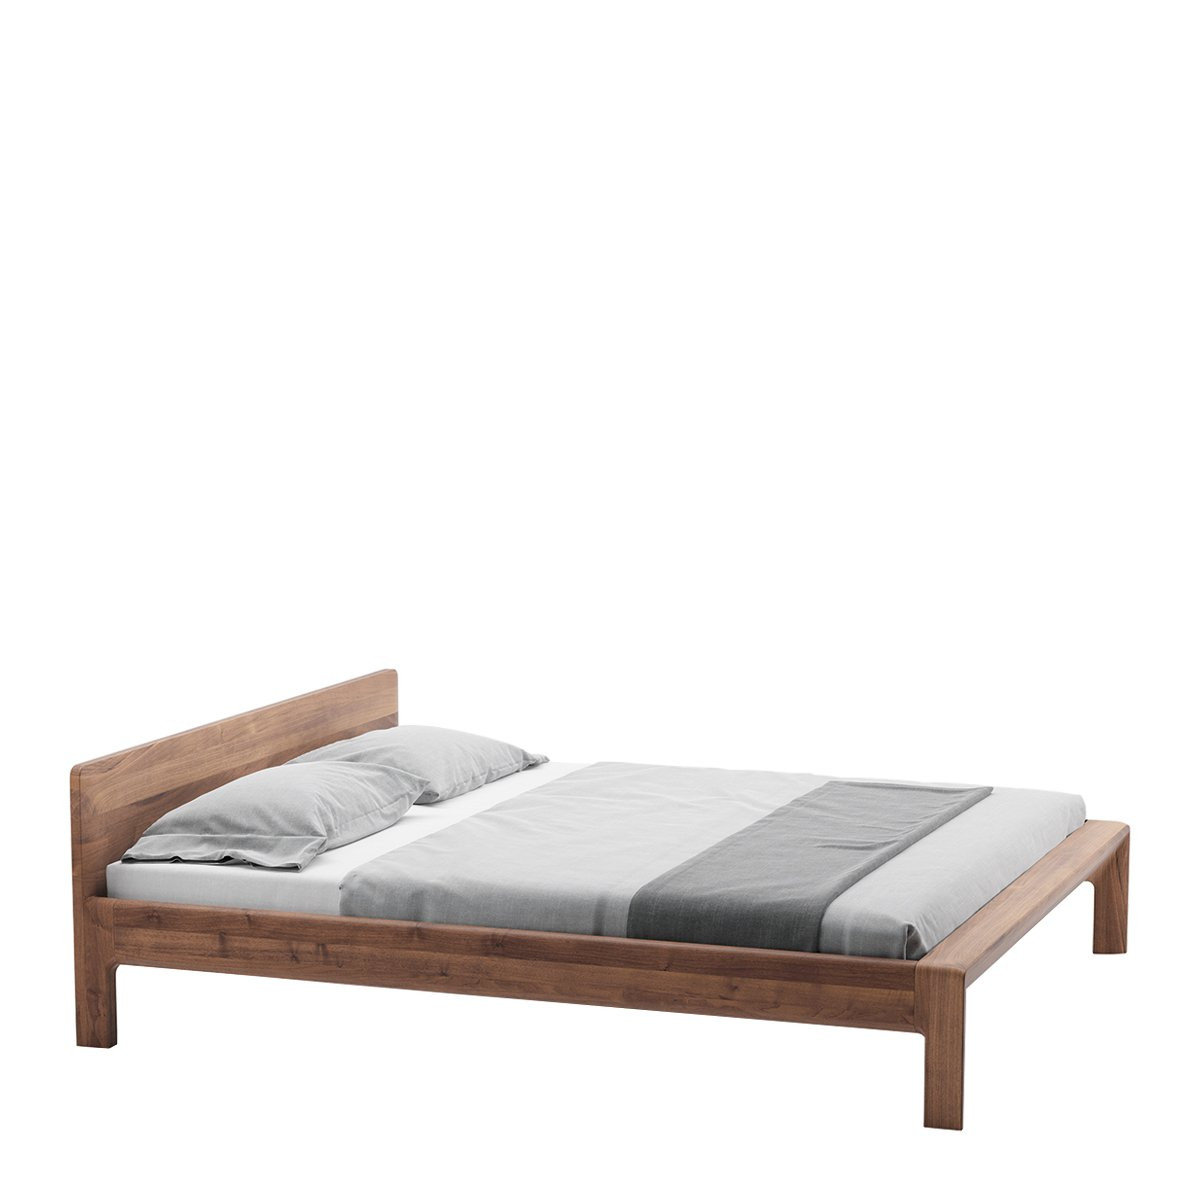 Artisan invito Bed Europees Walnoot - Naturel Olie - 160x200 cm / incl. Lattenbodems